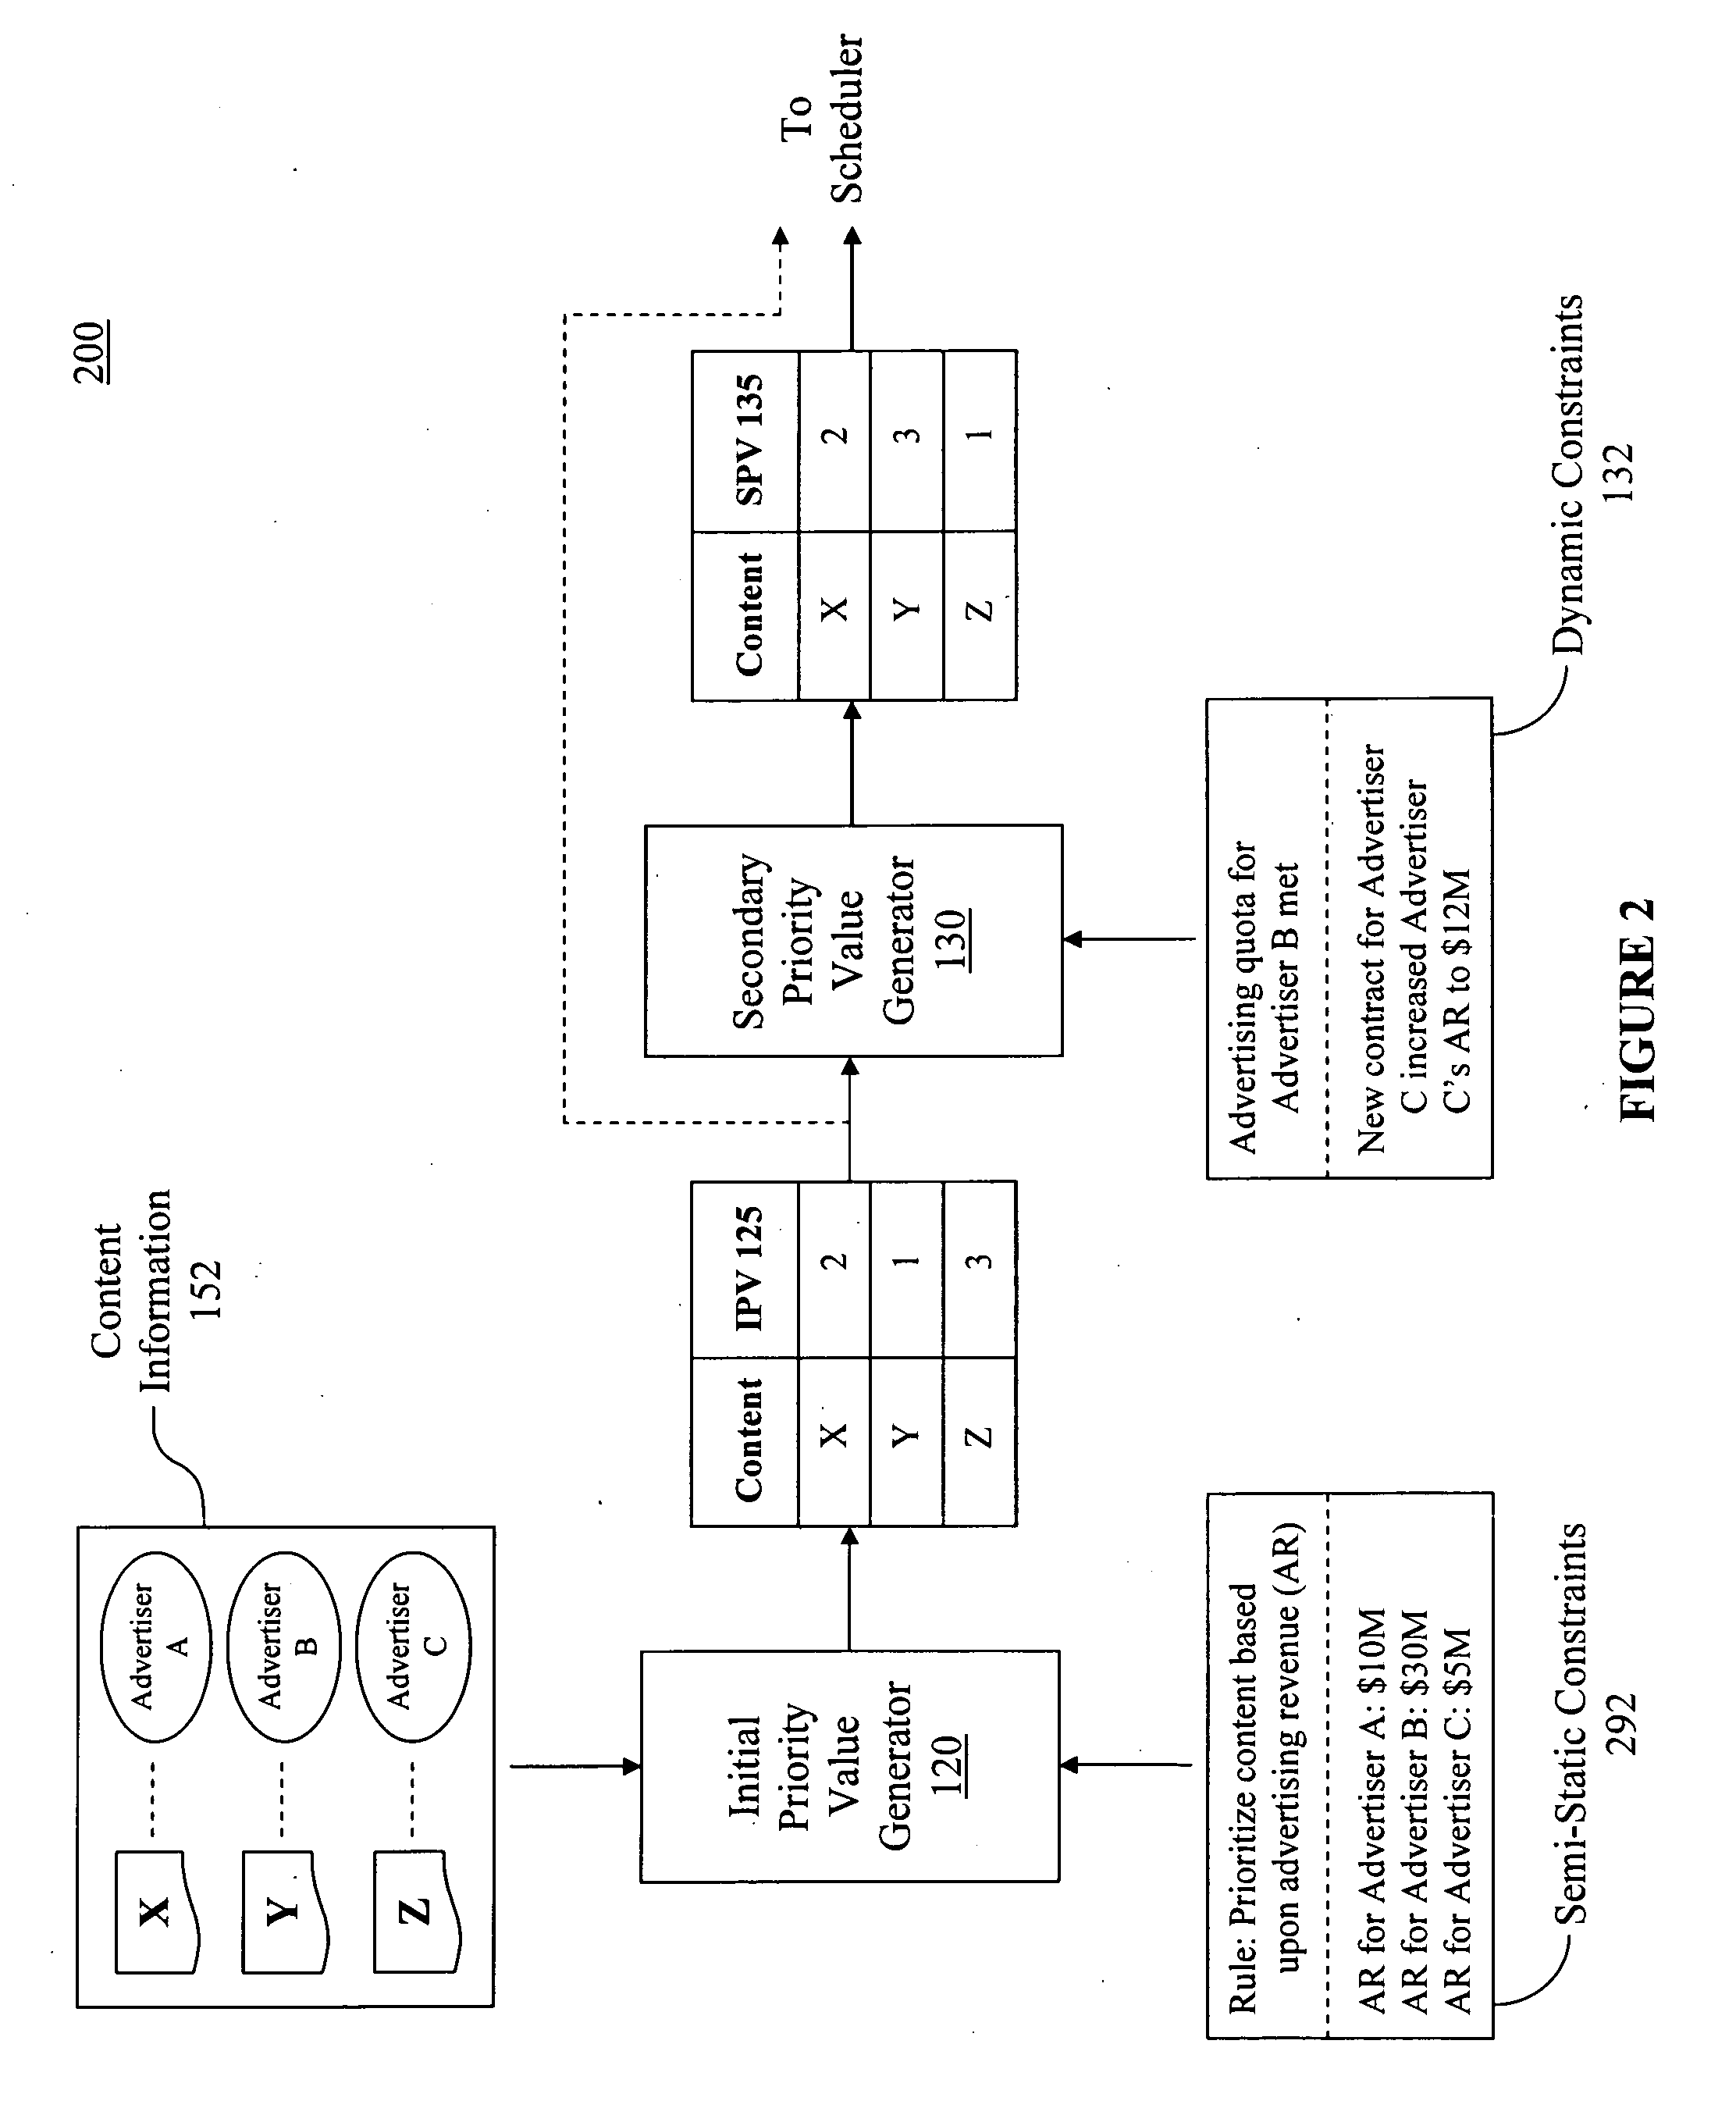 System and method for improved scheduling of content transcoding